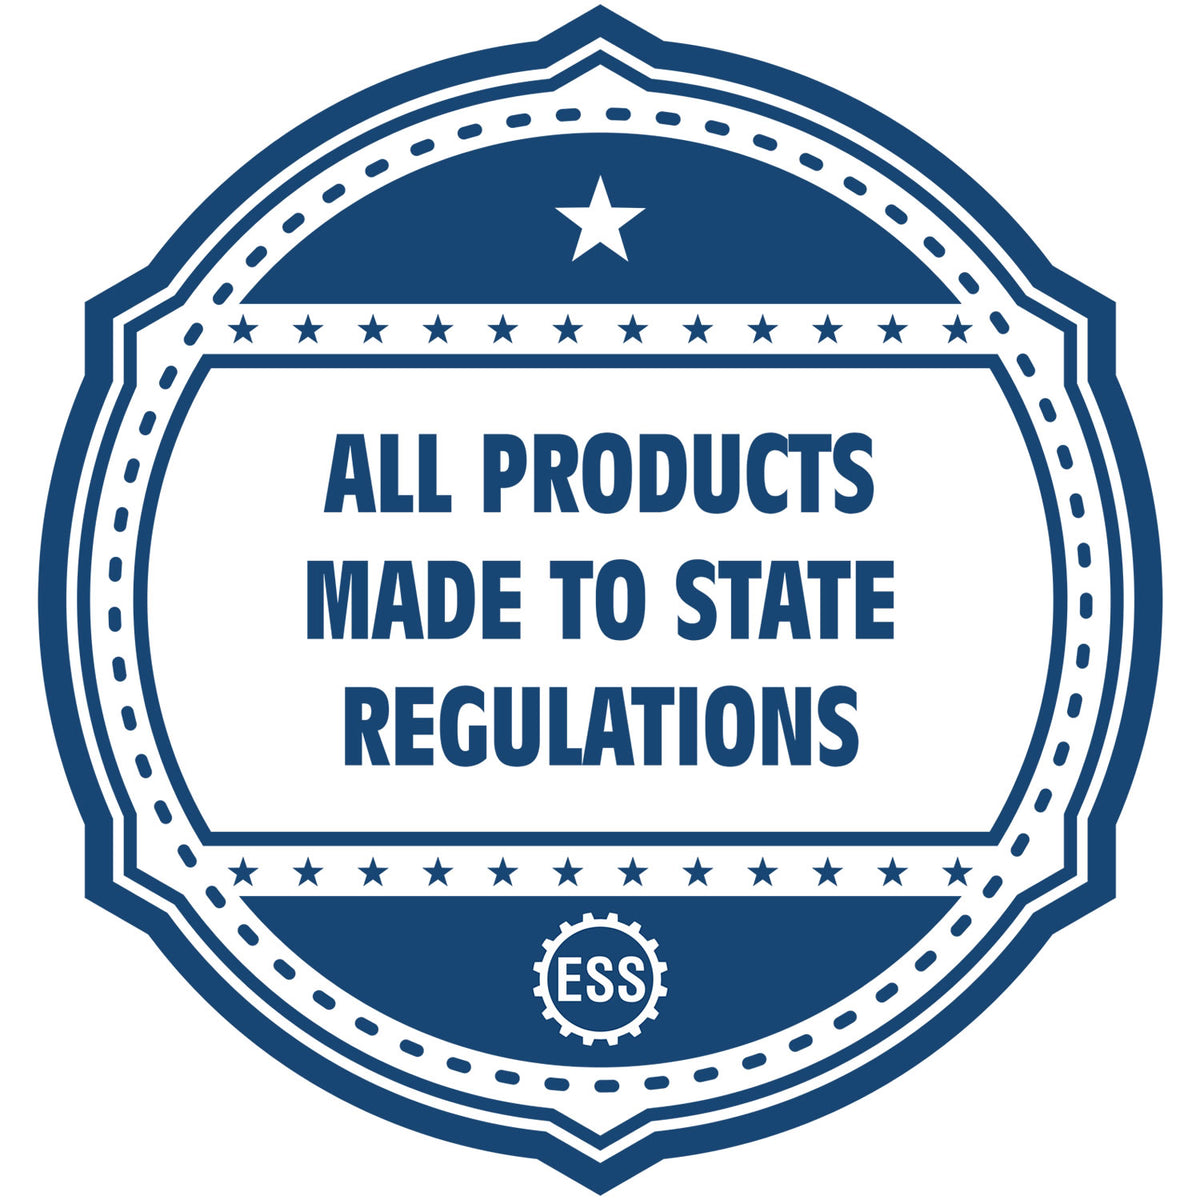 An icon or badge element for the Super Slim Oregon Notary Public Stamp showing that this product is made in compliance with state regulations.